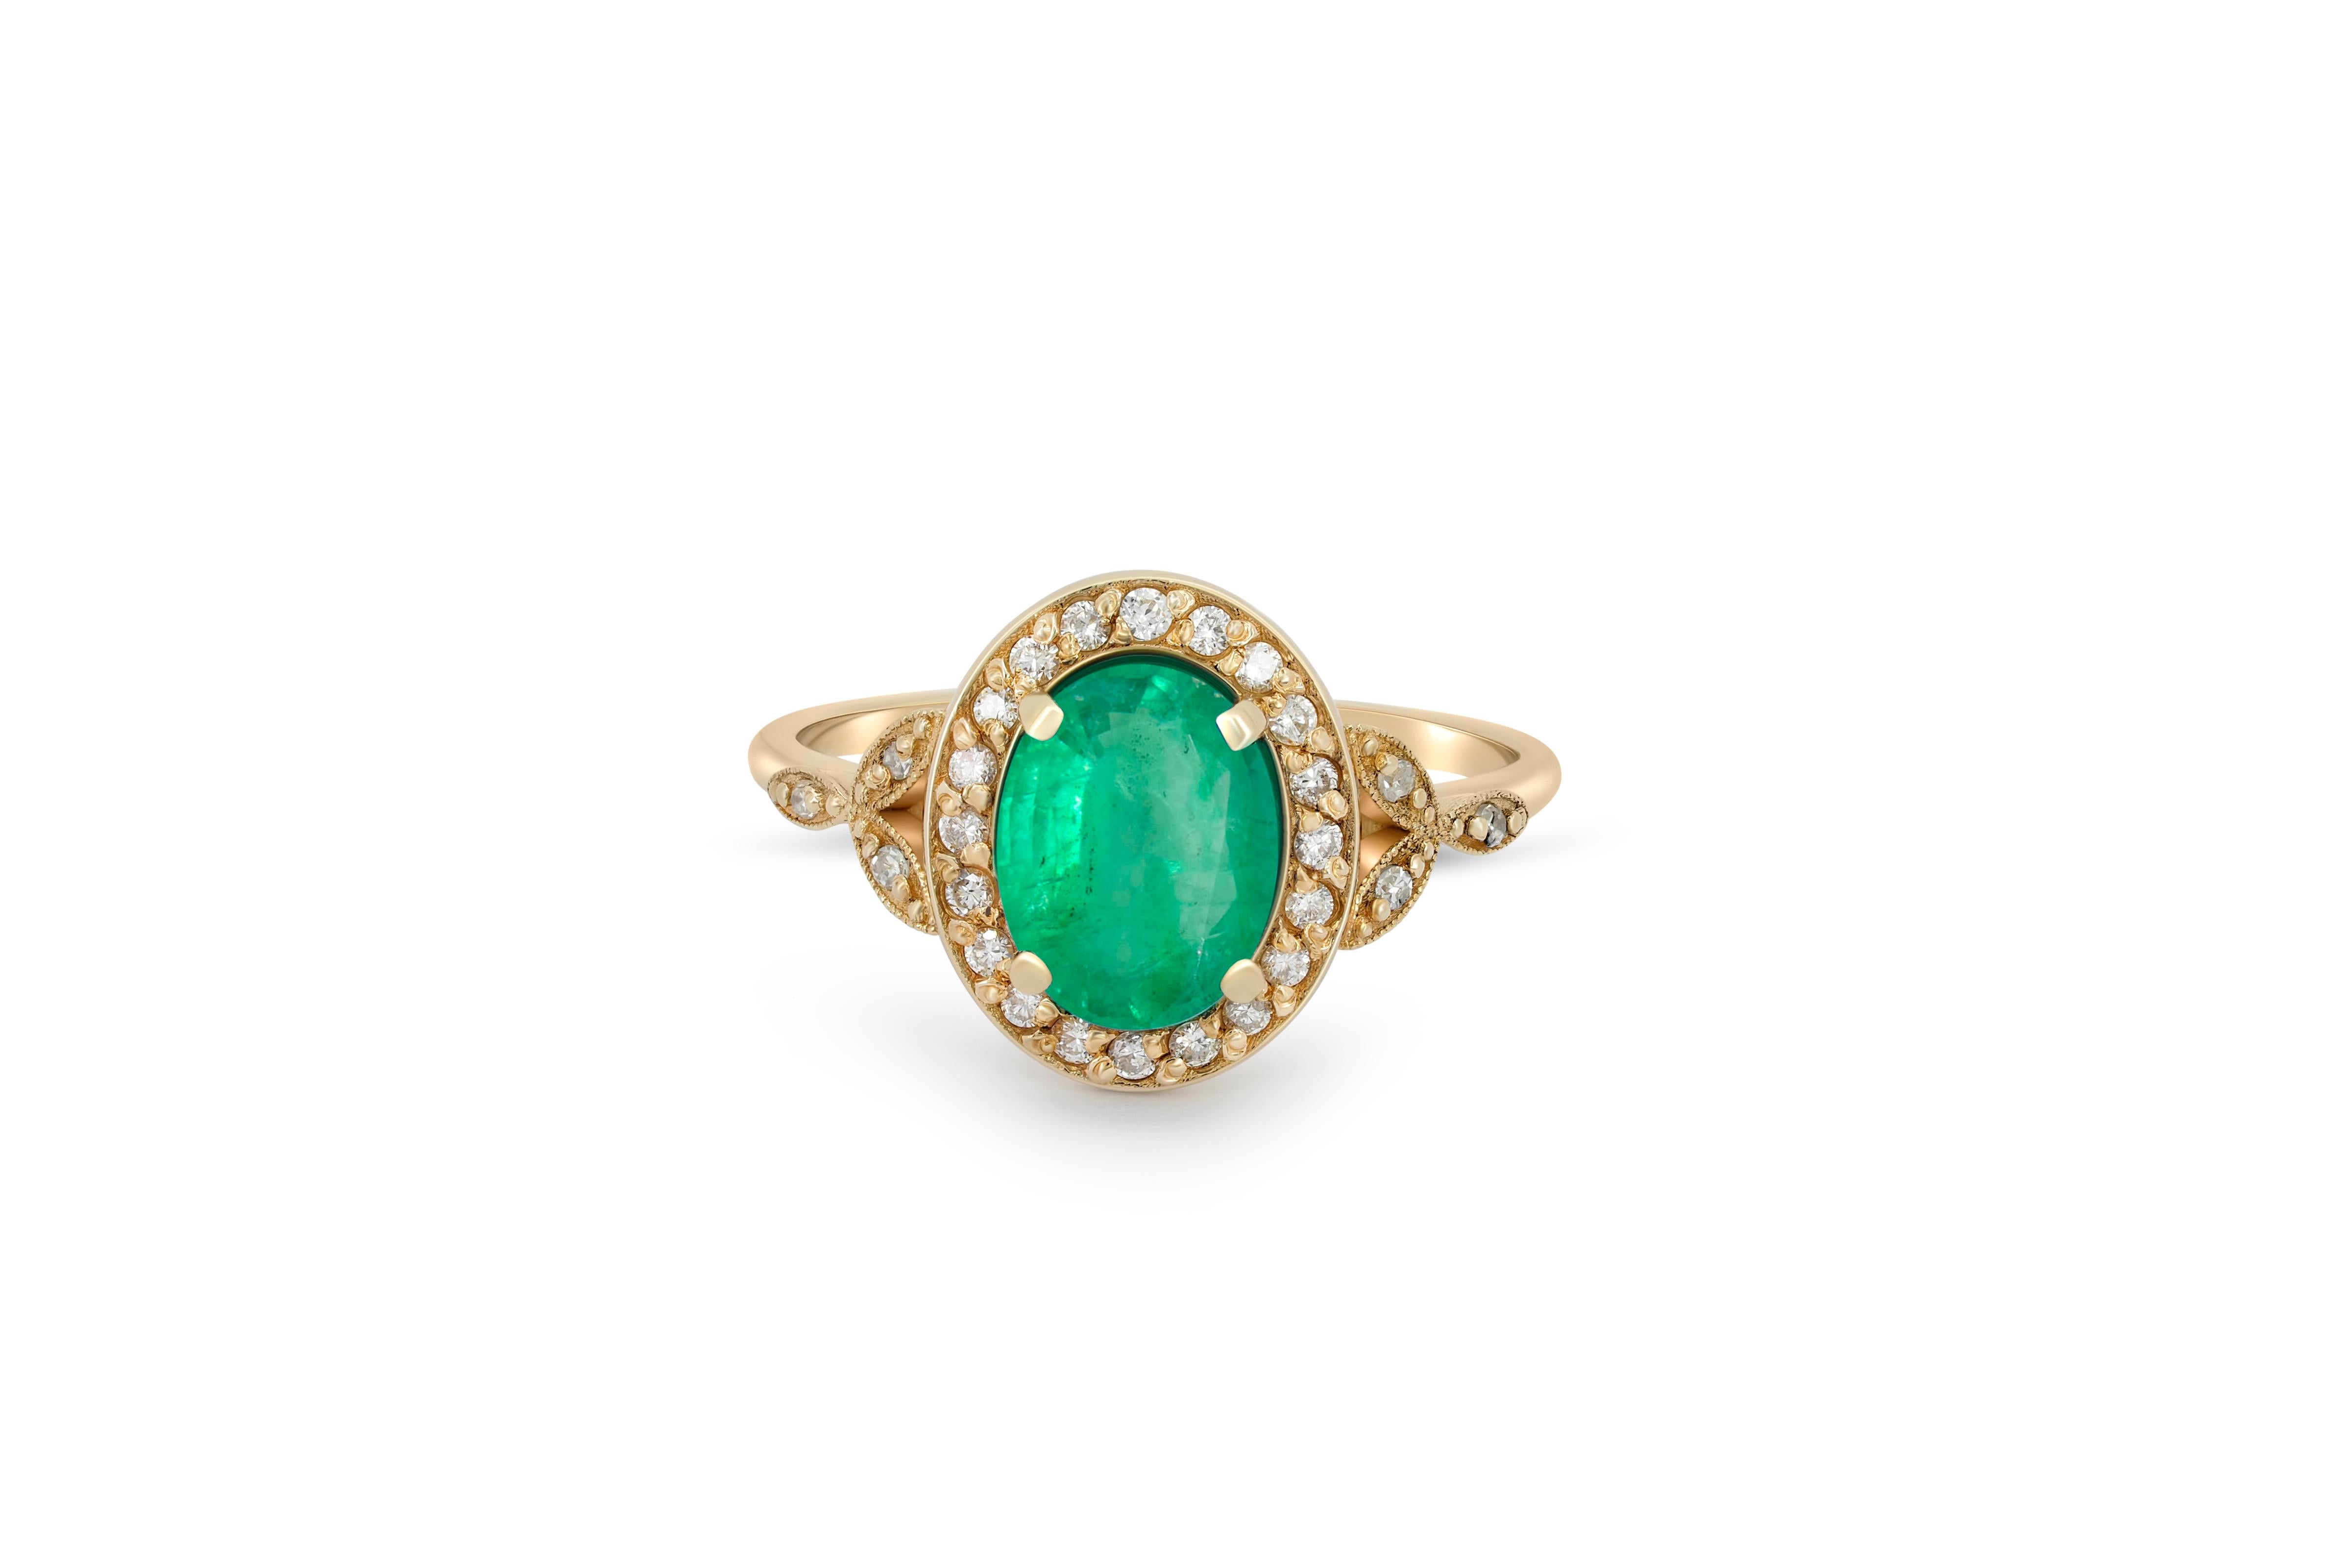 Oval emerald ring.
14k gold ring with emerald. Minimalist emerald ring. Emerald engagement ring. Emerald promise ring. Gift for her. Emerald ring for woman. Emerald Birthstone Ring. Stackable ring. Emerald gold ring. Emerald danity ring. Emerald